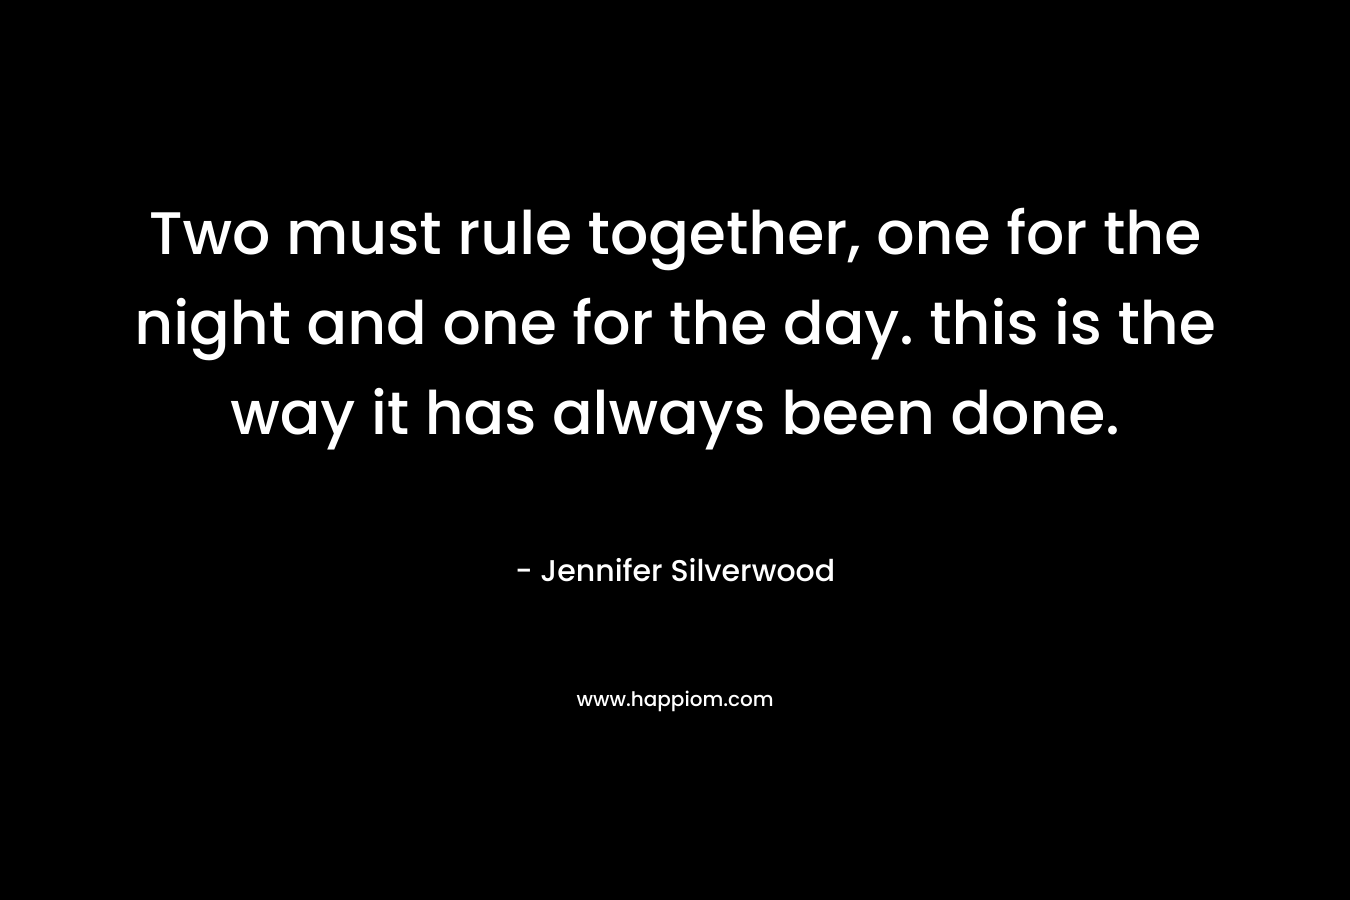 Two must rule together, one for the night and one for the day. this is the way it has always been done. – Jennifer Silverwood